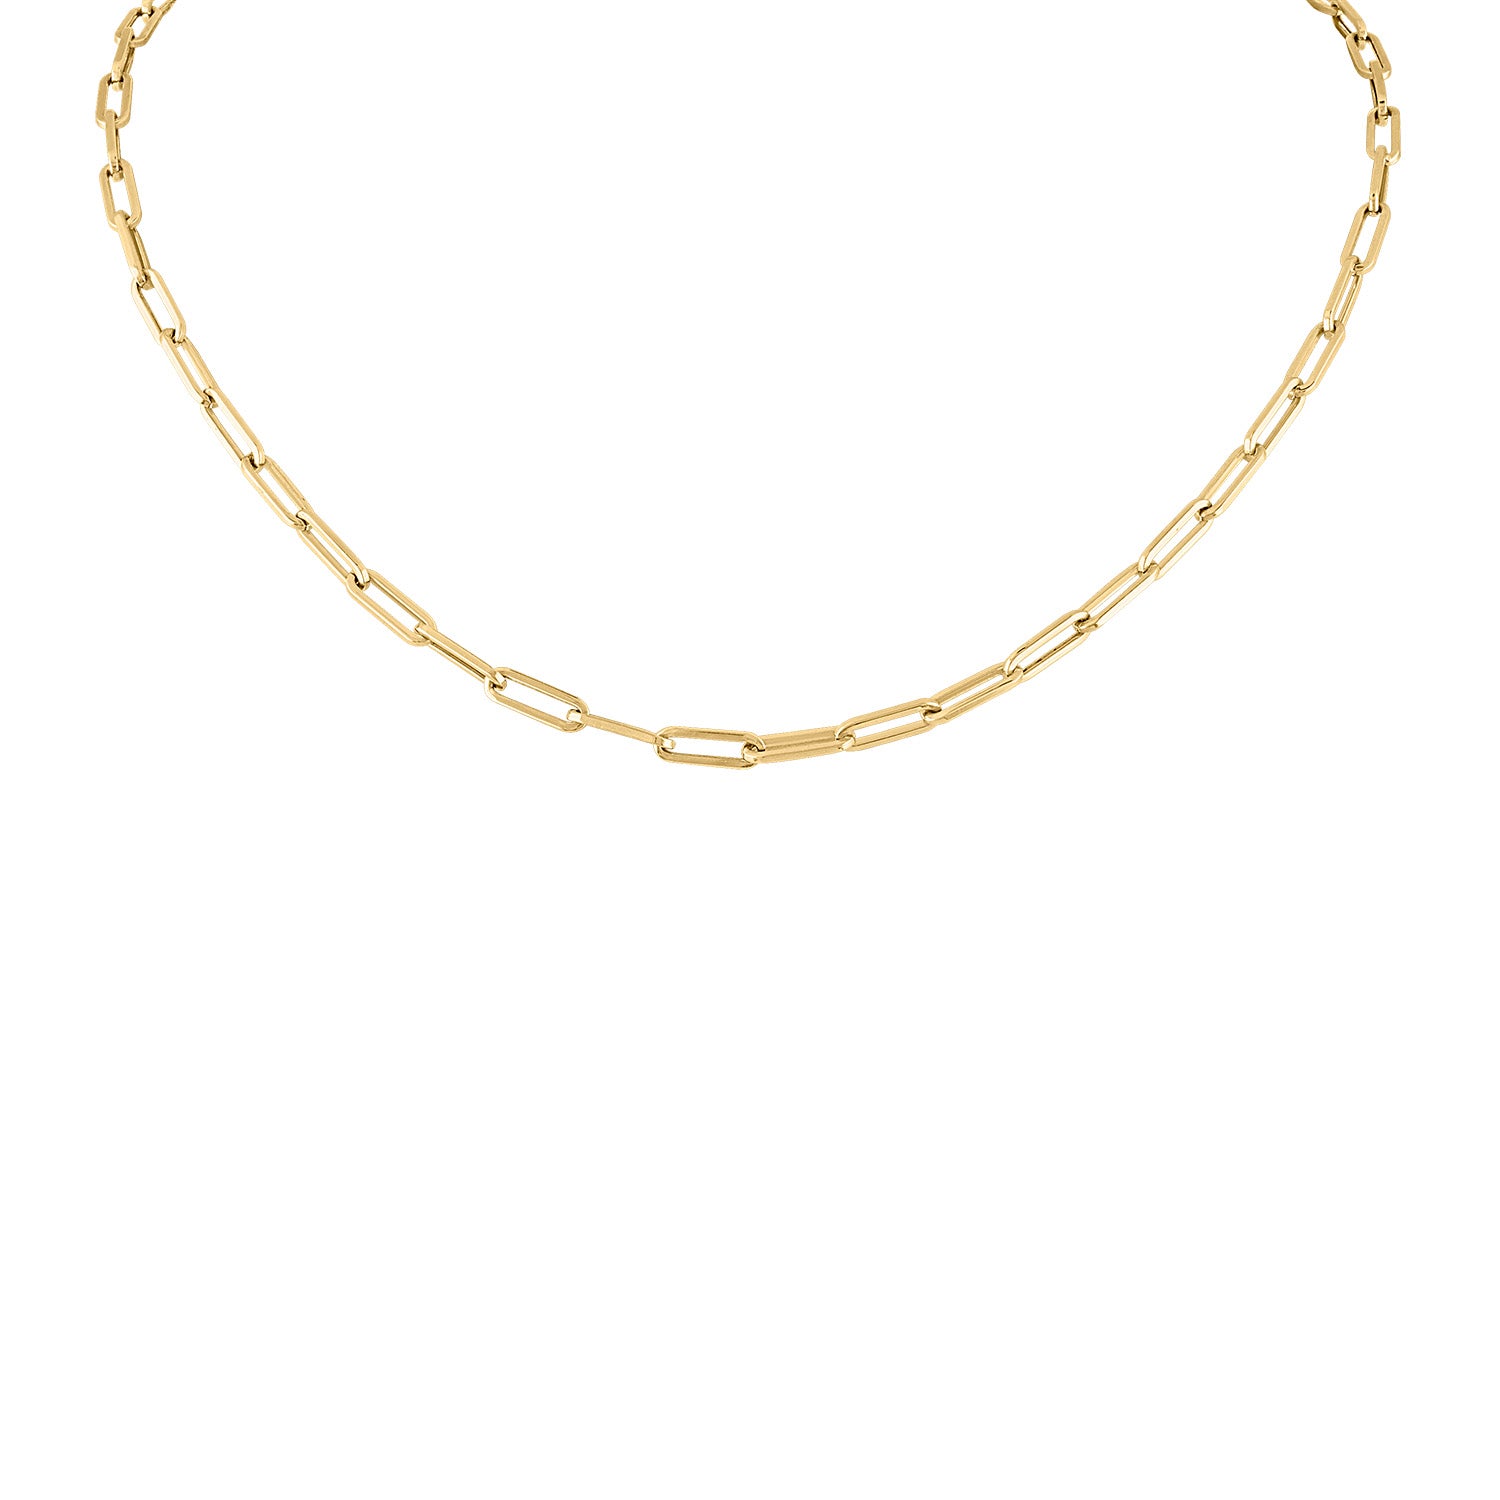 14KT GOLD XSMALL RECTANGLE LINK NECKLACE